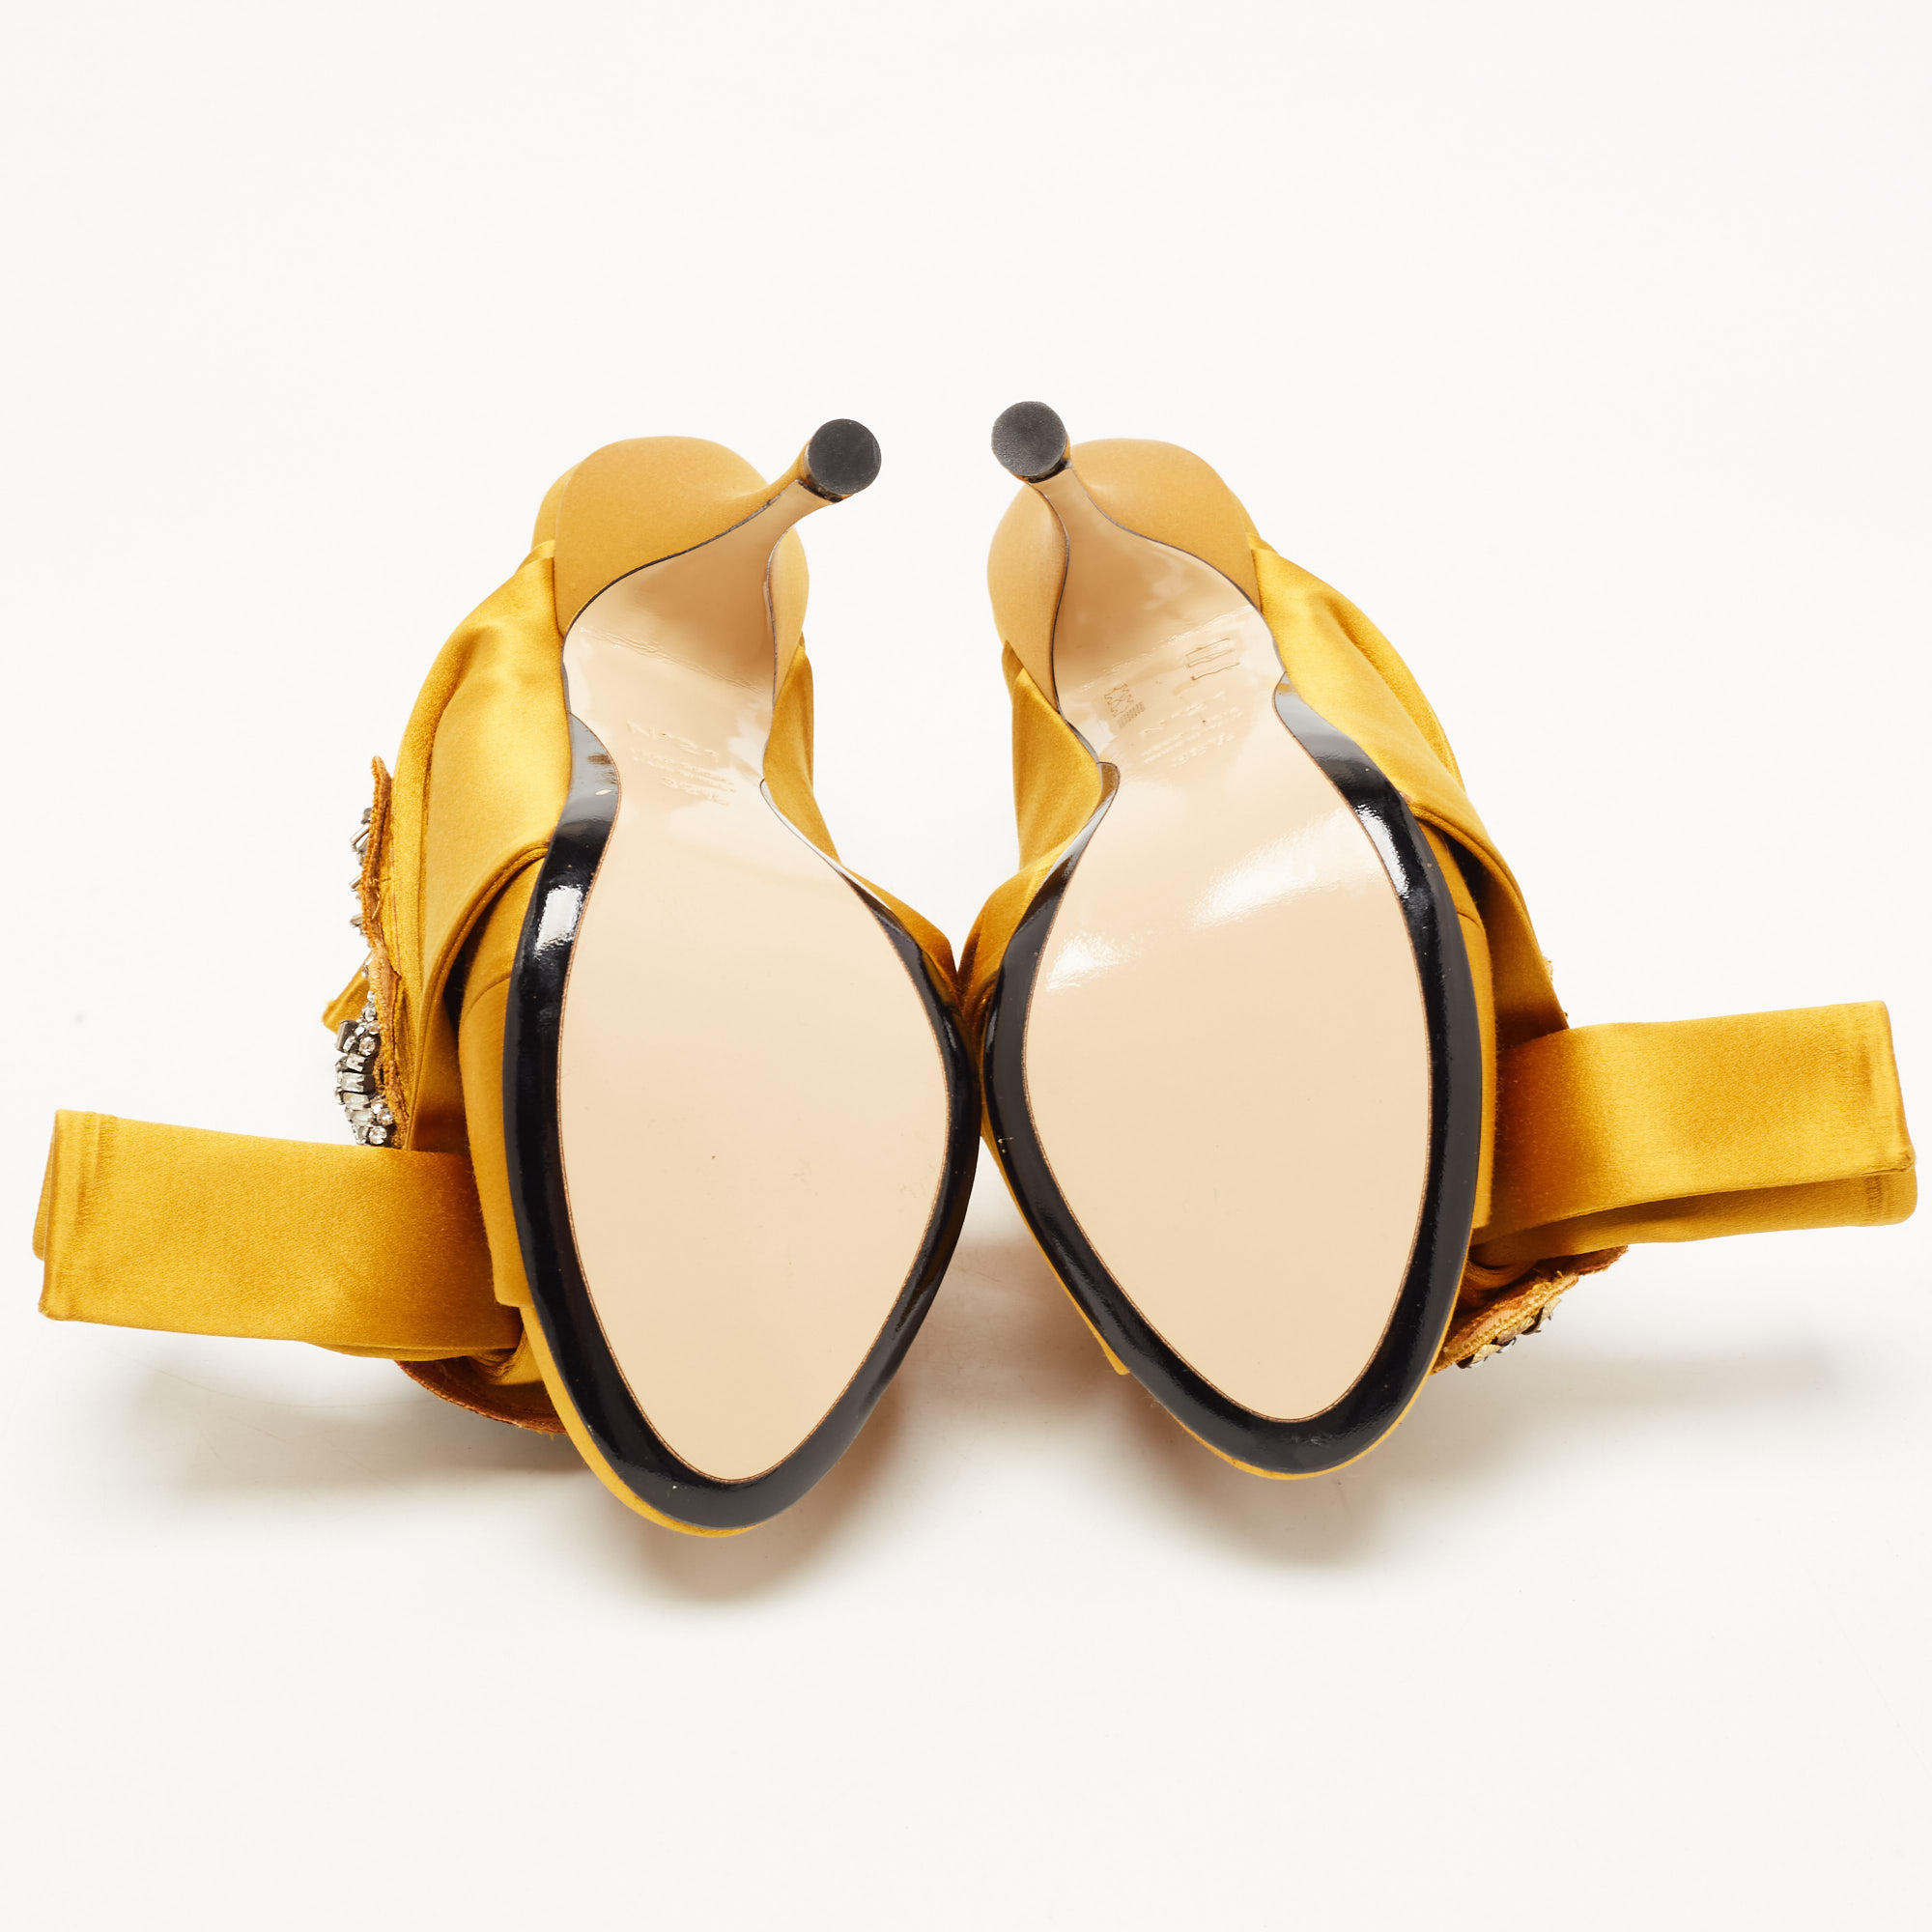 Nº21 Yellow Satin Crystal Knot Mules Size 38.5